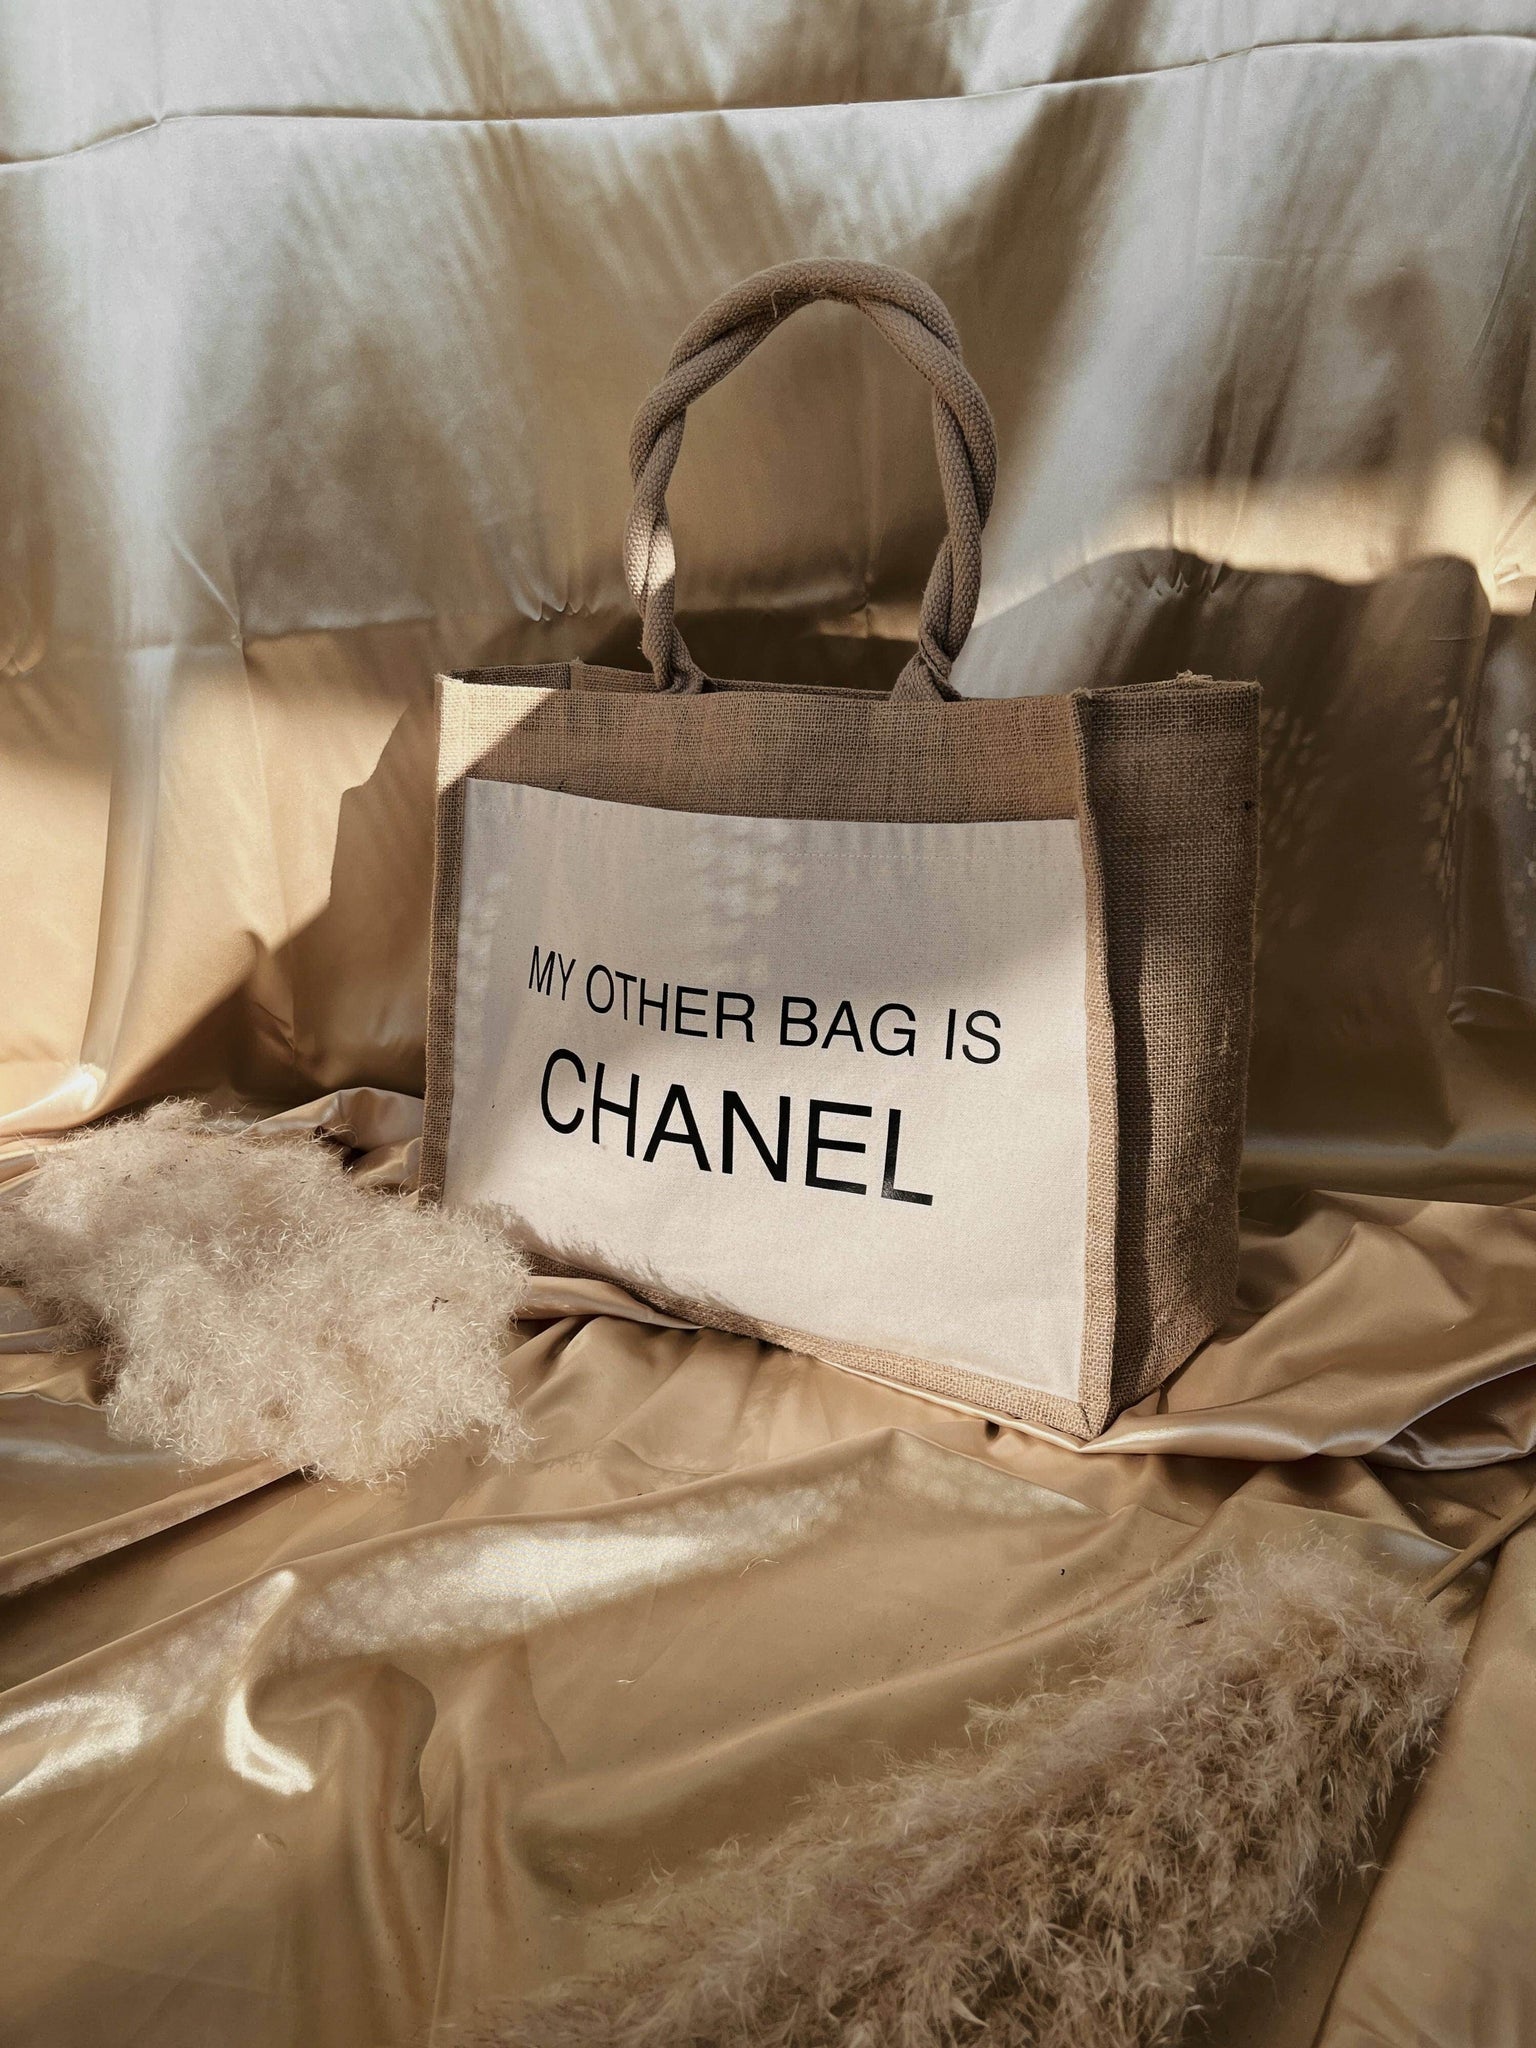 My Other Bag is Chanel Pack of 2 Beige as Shopping Bag or Beach Bag 42 x 33  x 19 cm Tote Bag Jute Bags Women's Foldable Fabric Bag with Handles Made